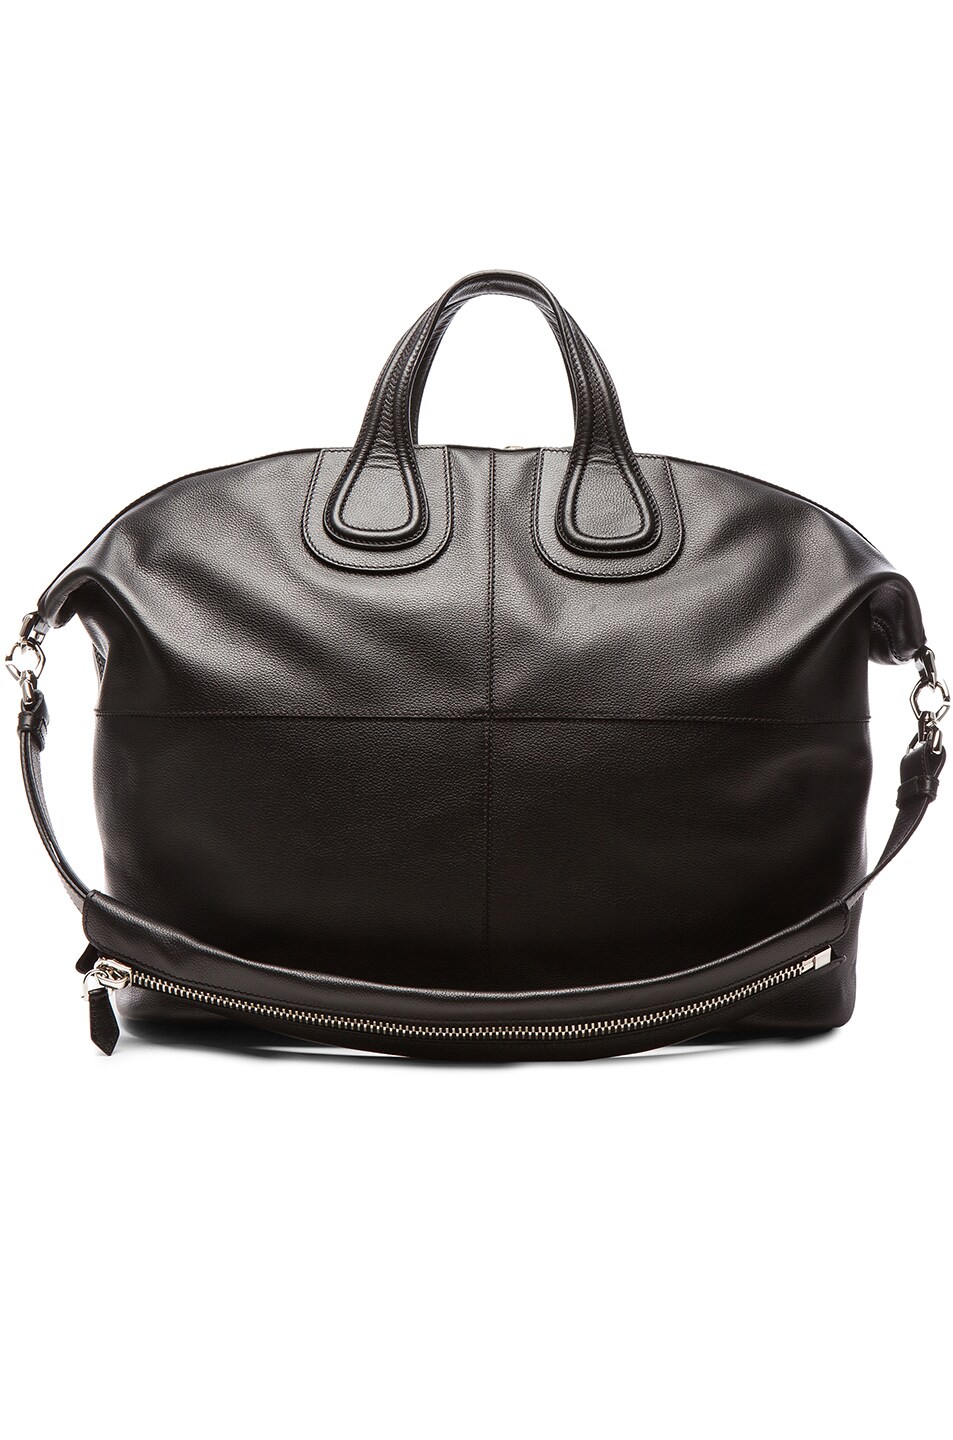 Image 1 of Givenchy Nightingale Bag in Black